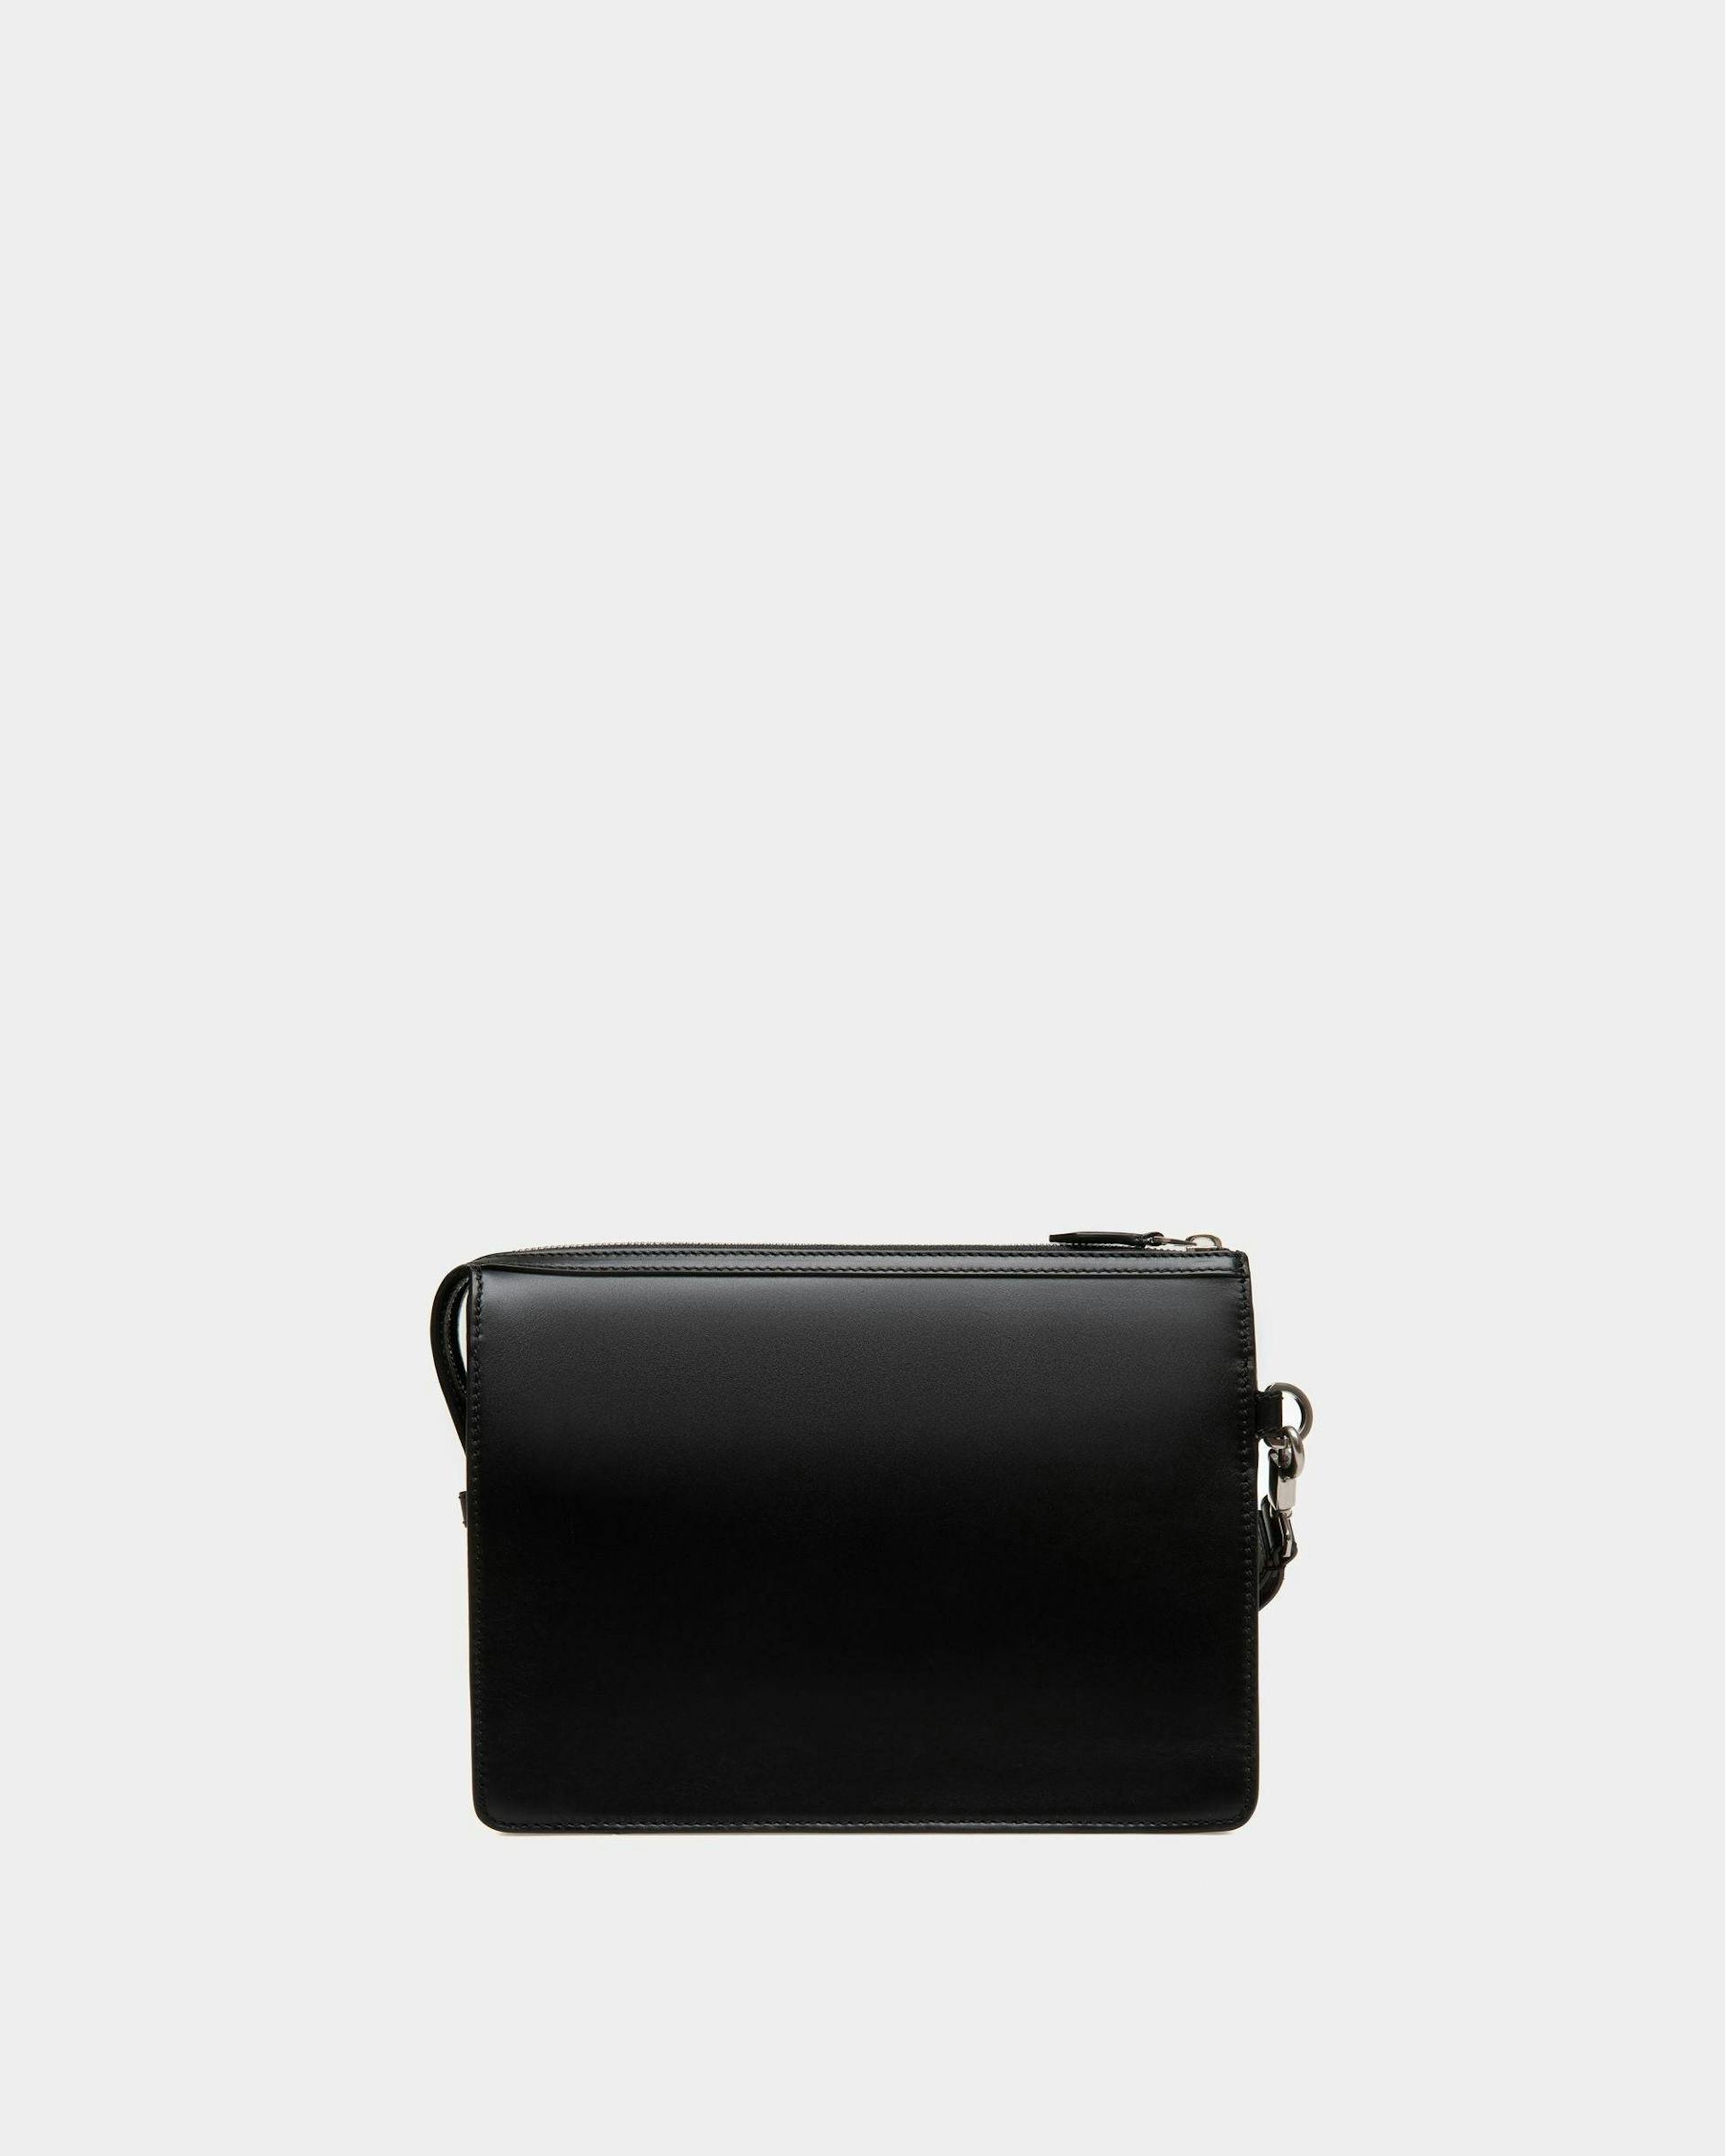 Men's Busy Bally Pouch in Black Leather | Bally | Still Life Back